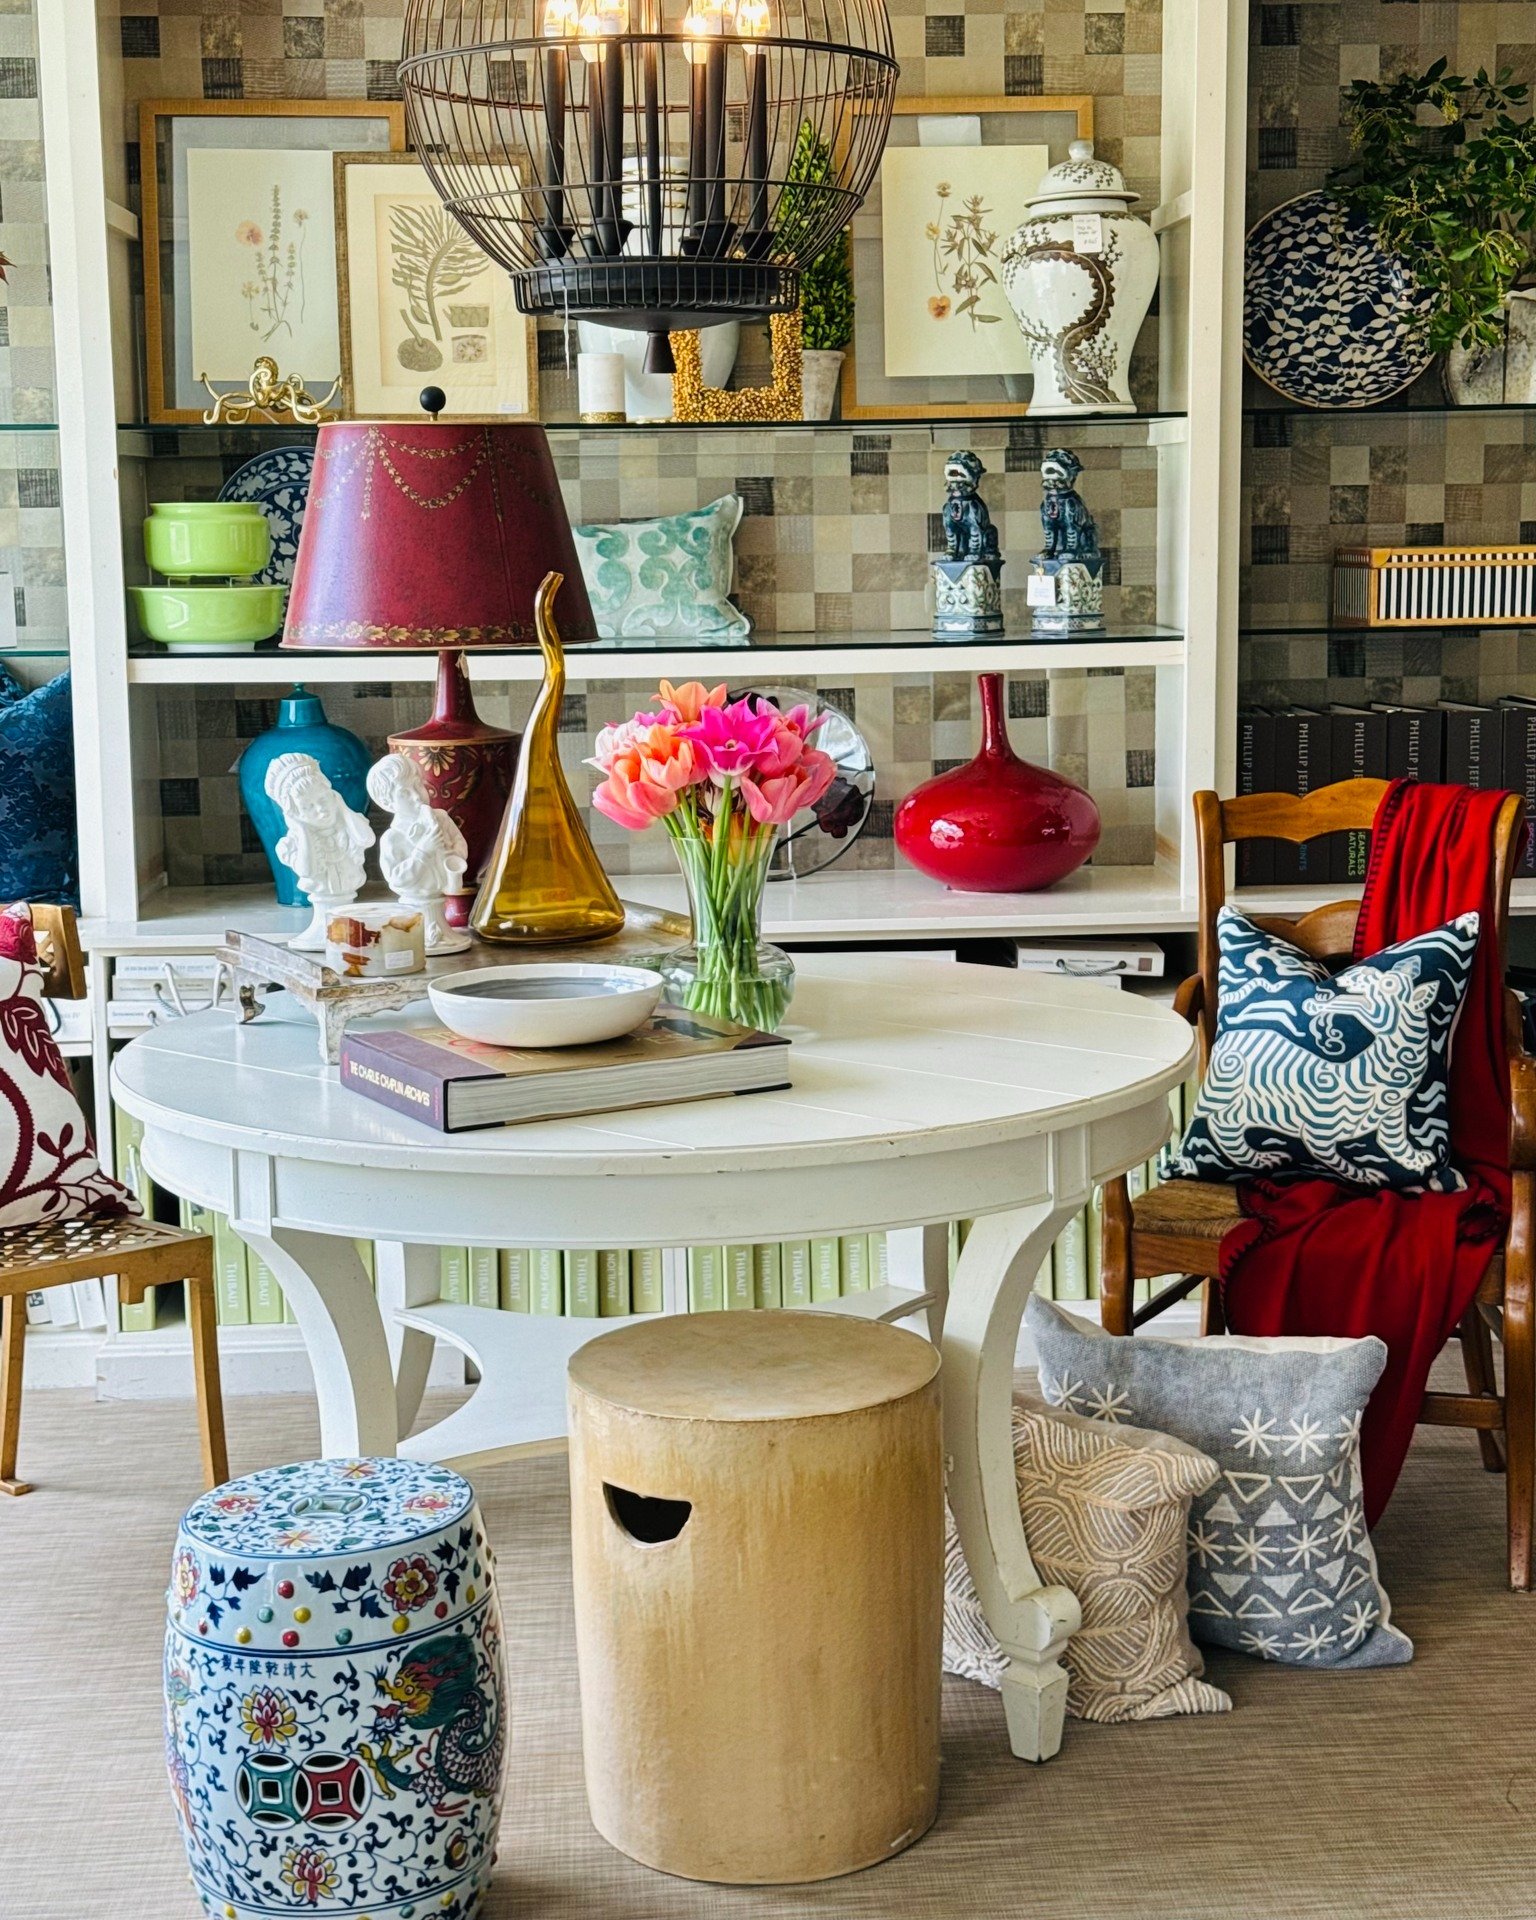 Sneak peak at a corner of our refreshed retail space.  Stop in if you&rsquo;re passing by and check out the unique finds we have in studio, with new pieces arriving all the time! Our team would love to offer you a cold beverage or a cup of tea as you